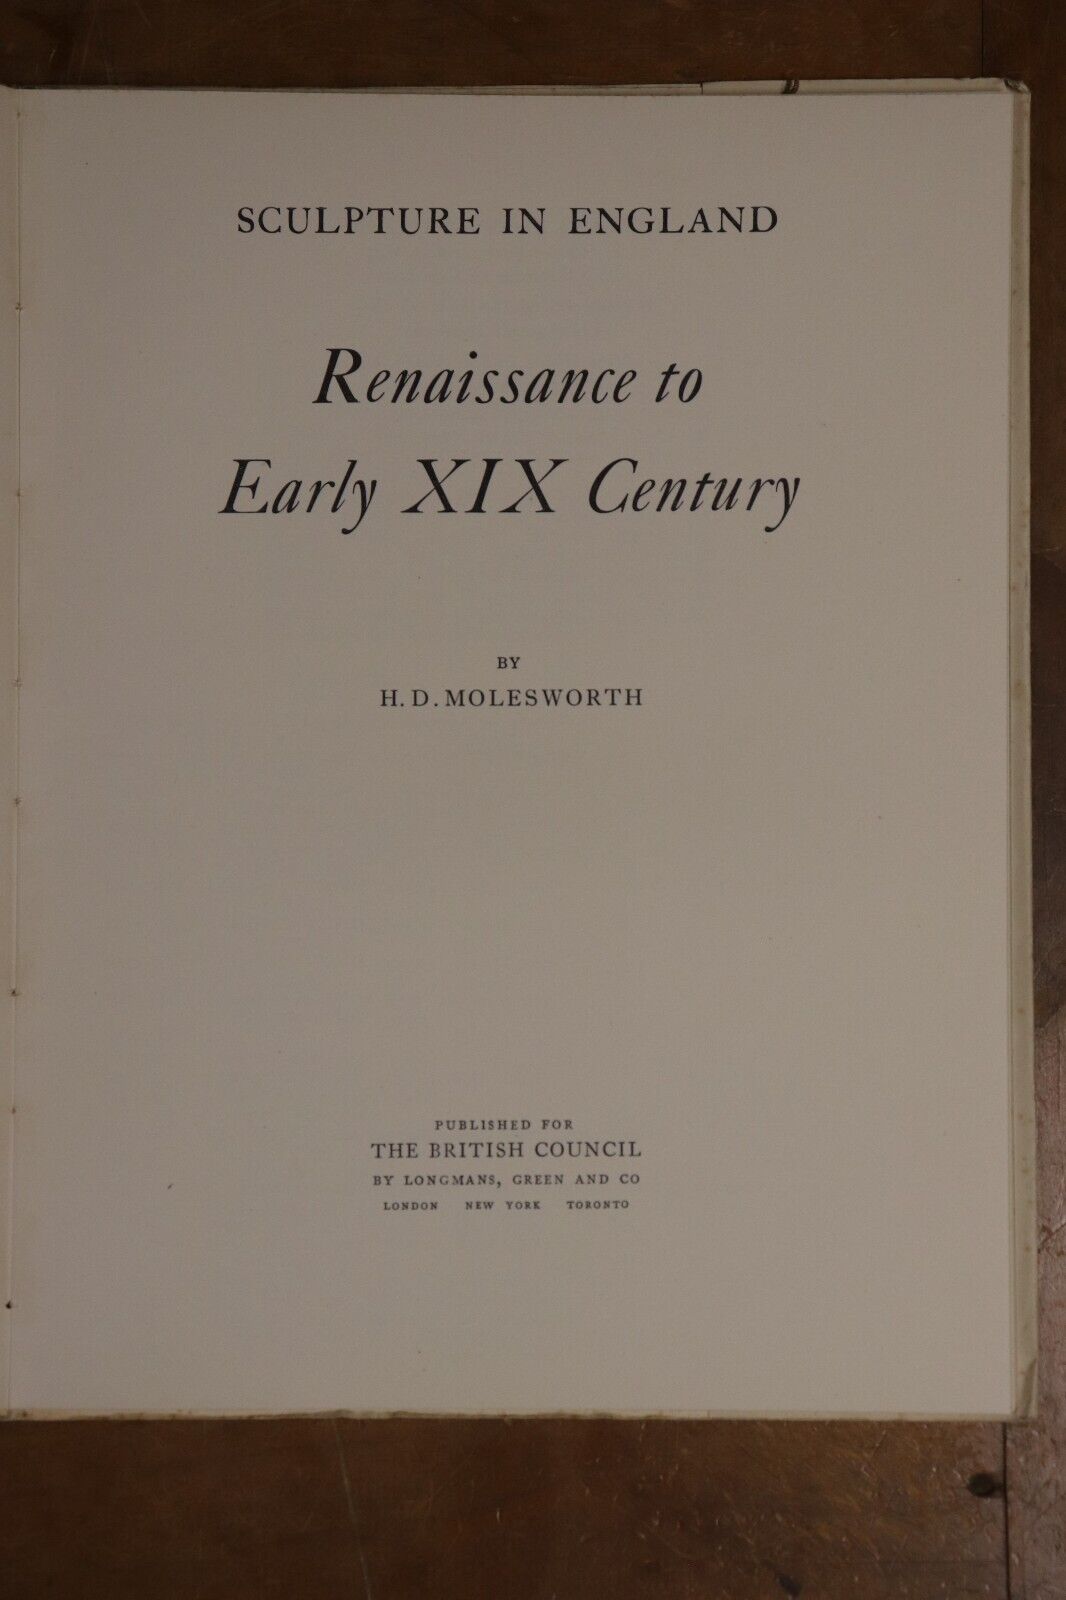 Sculpture In England: Renaissance To Early XIX Century - 1951 - Art History Book - 0